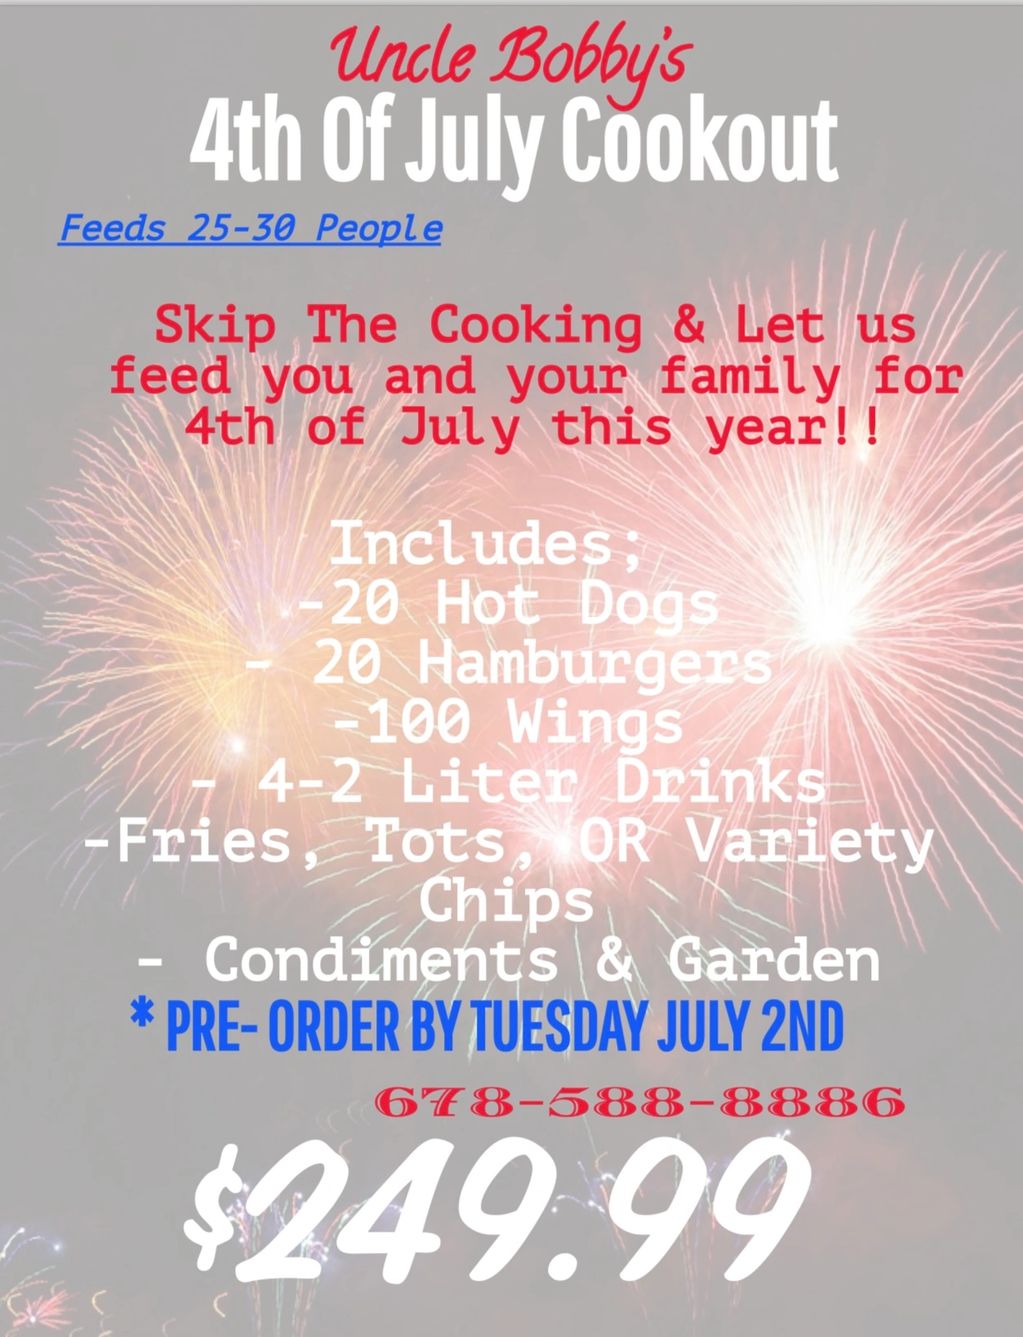 Call Today to get your order in!